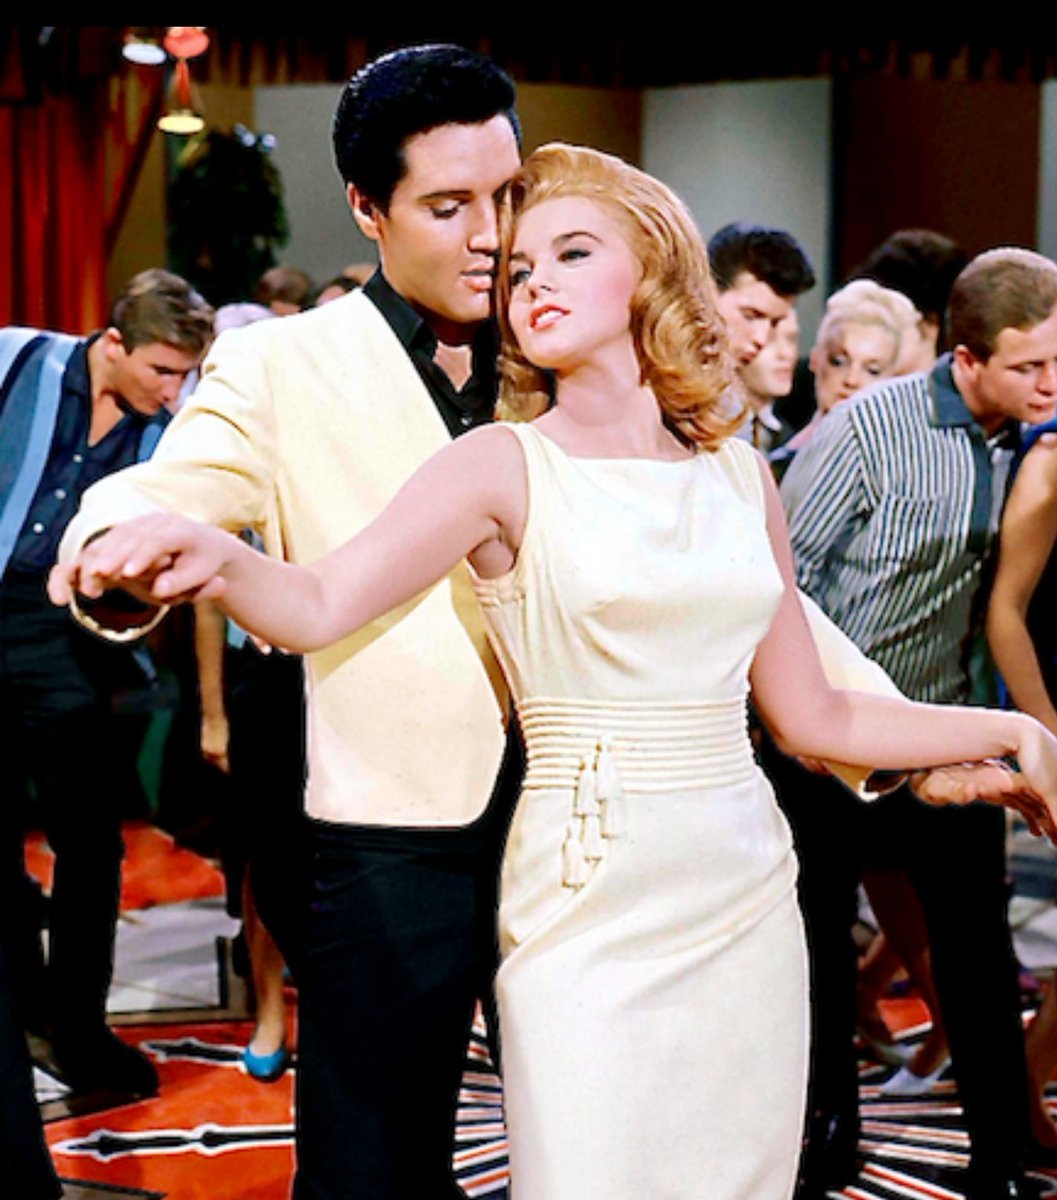 May 21 1964;
New York Times reviews “Viva Las Vegas” as “Whatever it isn’t, “Viva Las Vegas” remains friendly, wholesome and pretty as all get-out.”
#ElvisPresley #AnnMargret